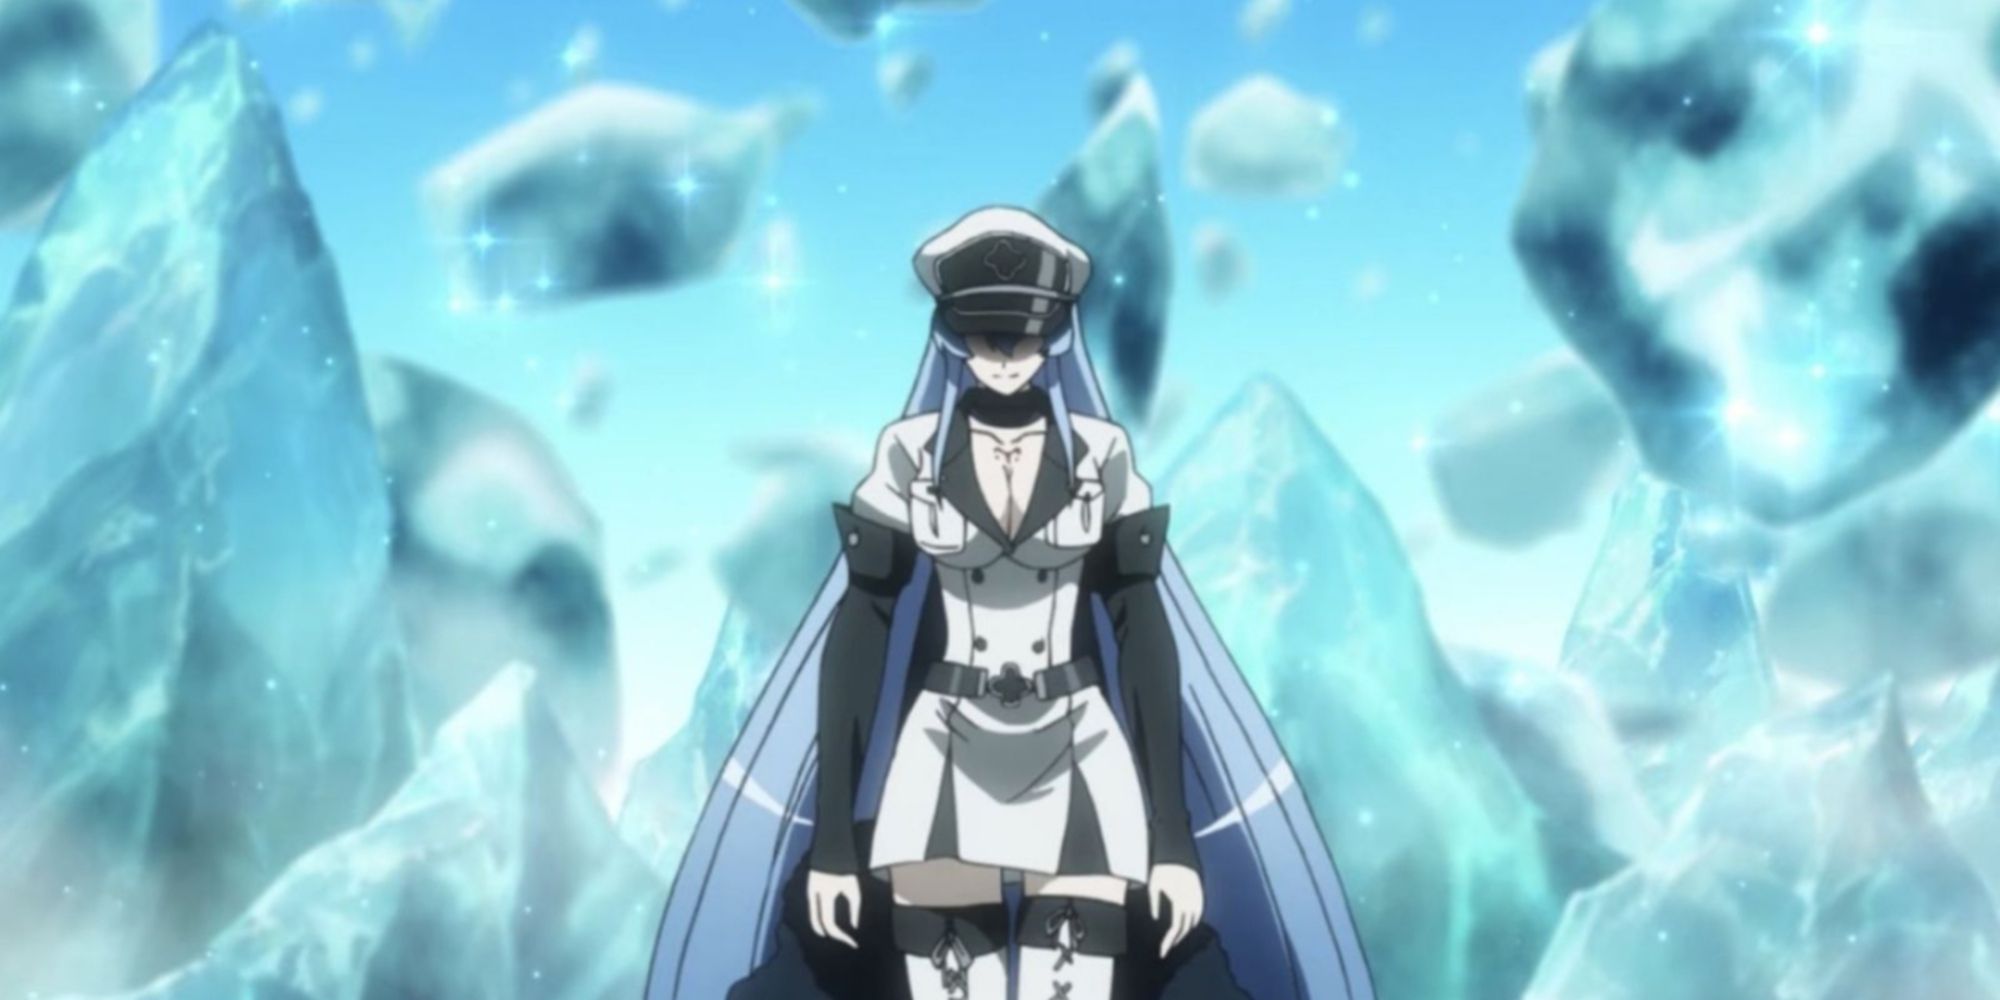 esdeath and her ice powers